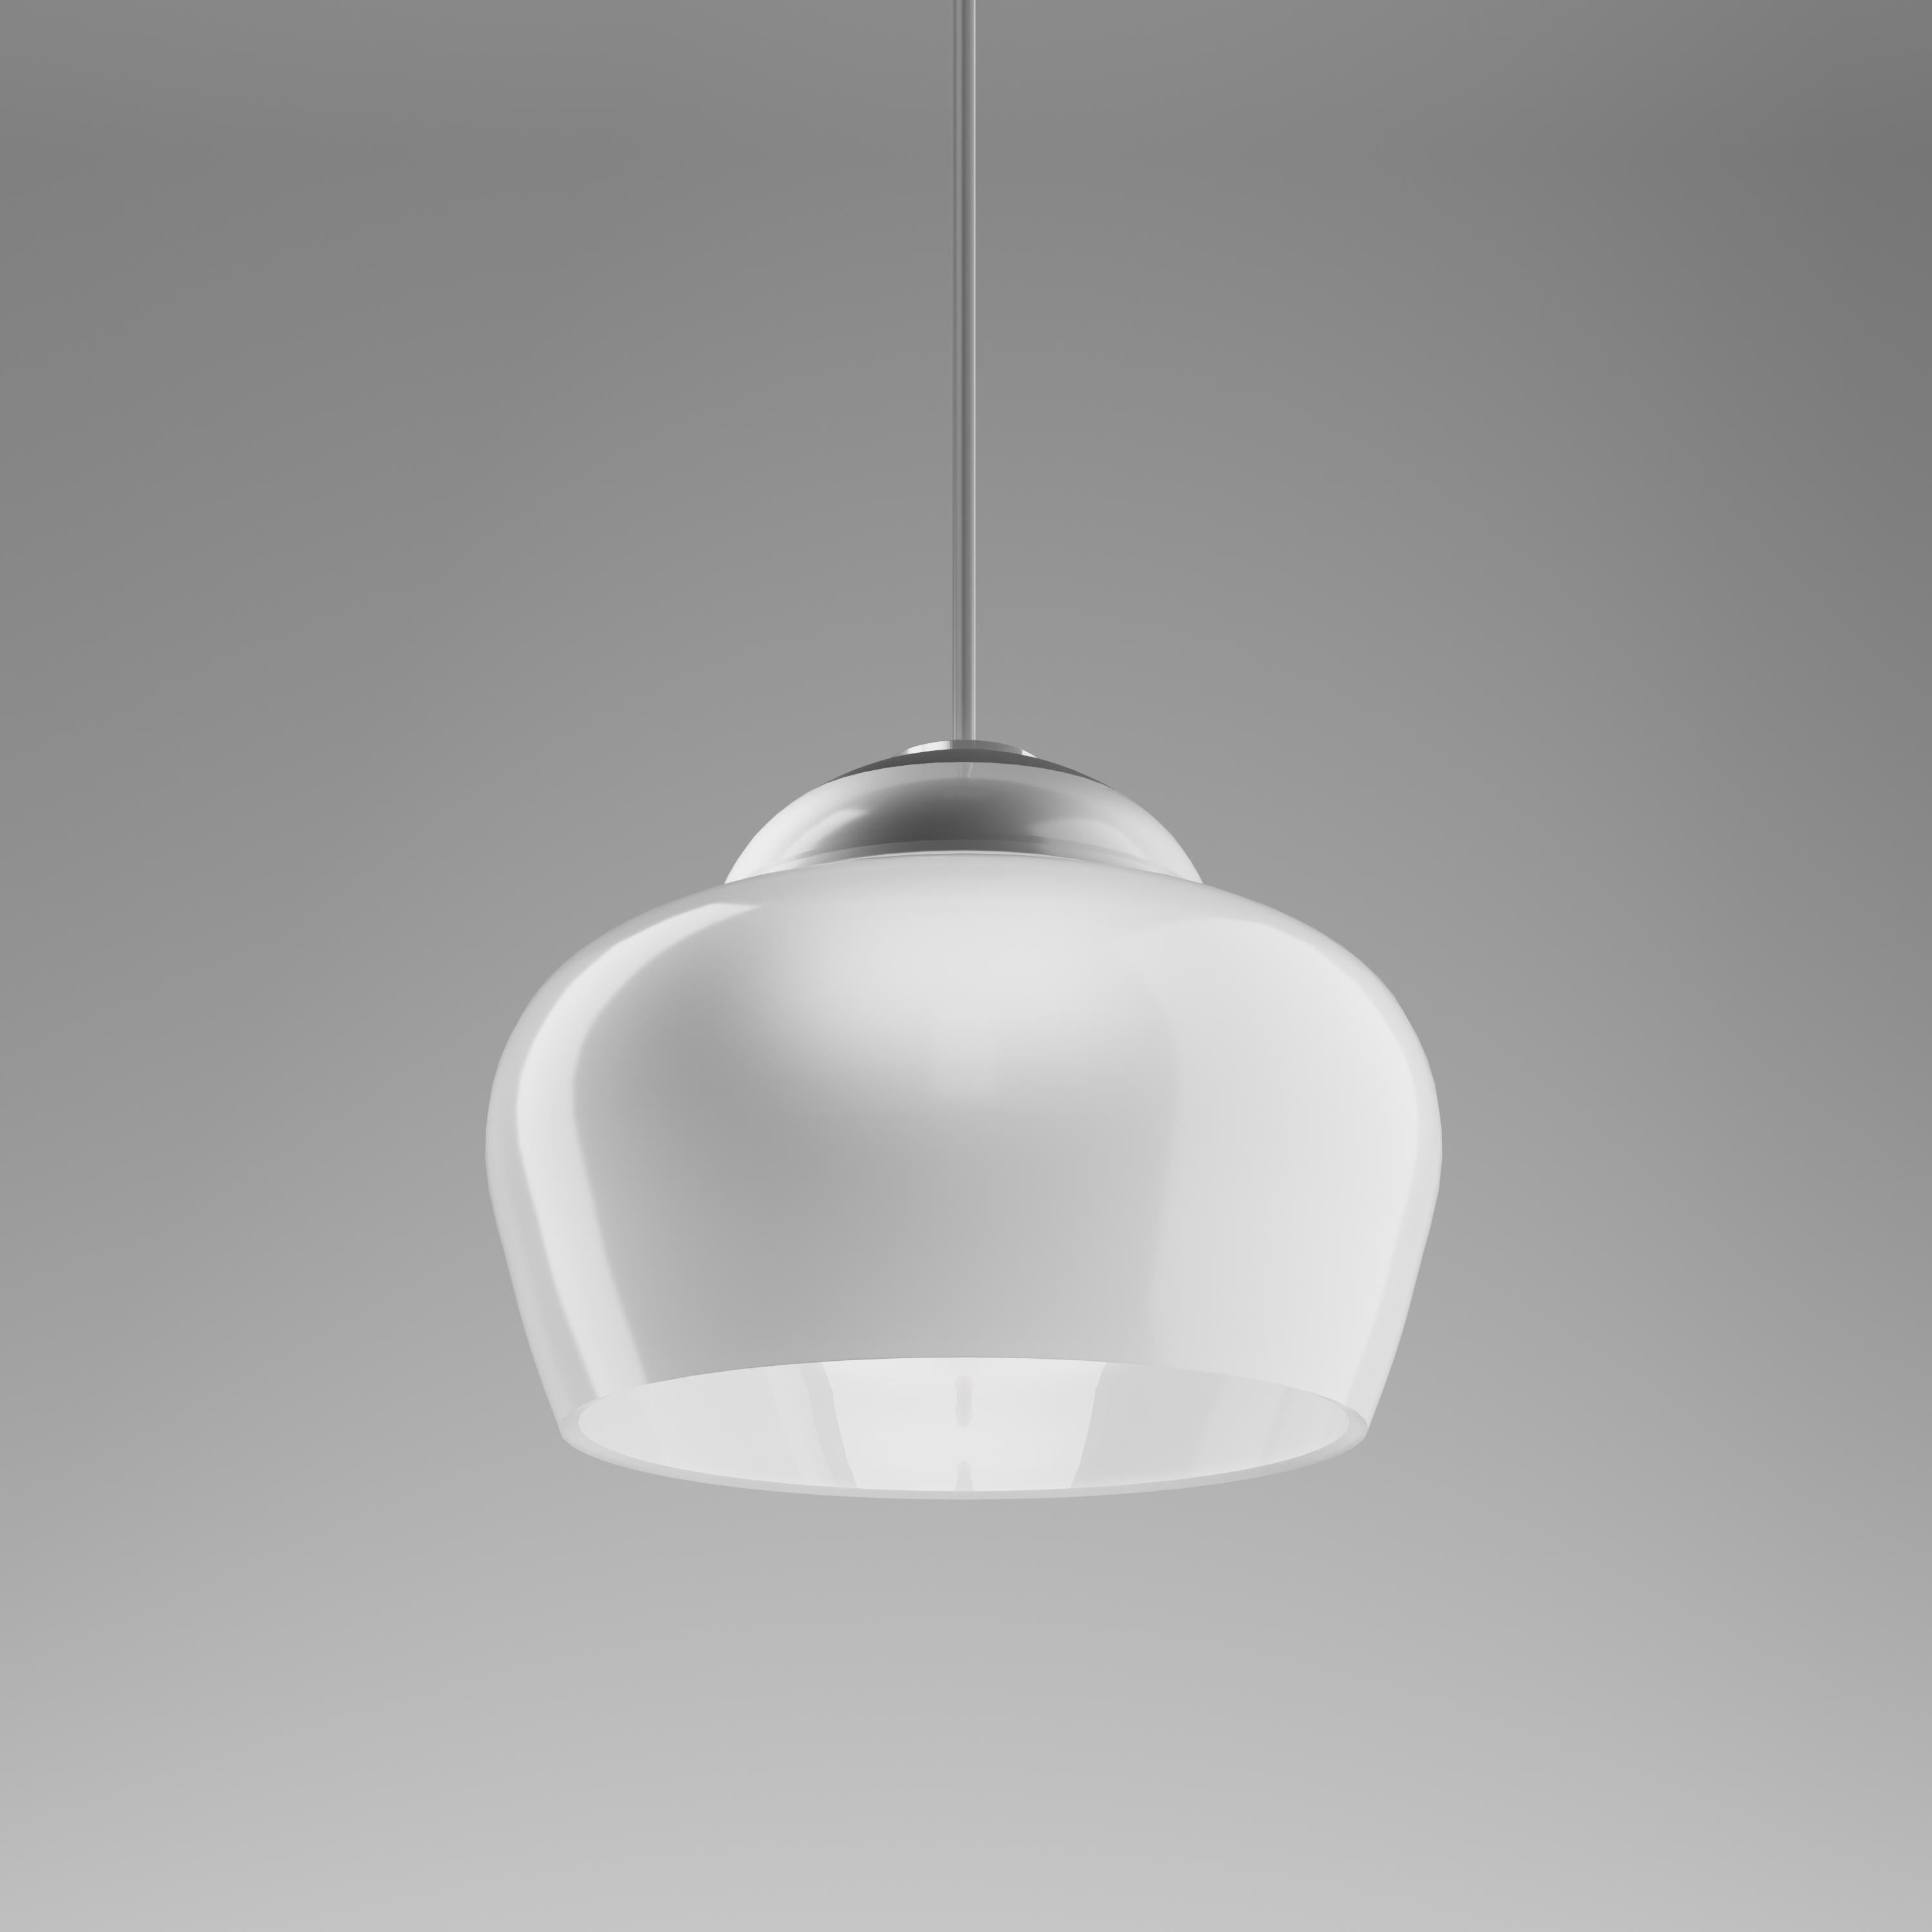 The main idea of the collection is built around a lampshade, characterized by the convexity at the top and the sfumato technique of the crystal, which allows light to radiate and spread comfortably in the environment. LED light source. This LED